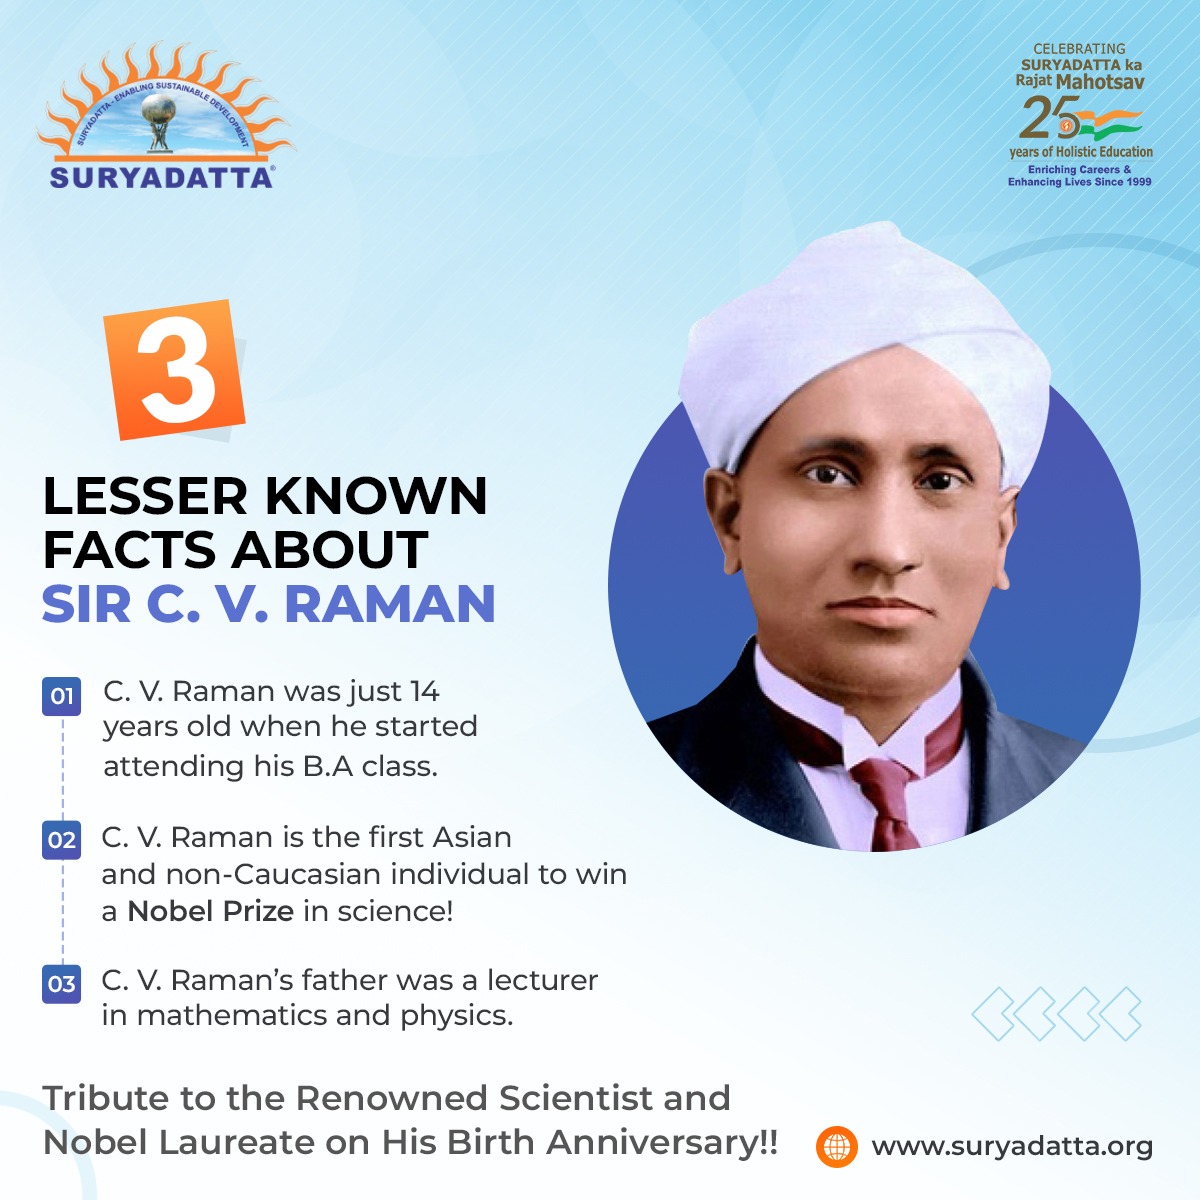 On the birth anniversary of Sir C.V. Raman, here are 3 lesser-known facts about this great man! #SGI #HappyBirthdayCVRaman #CV_Raman #NobelPrizeWinner #IndianPhysicist #ScienceIcon #RamanEffect #CelebratingScience #PhysicsLegend #PrideOfIndia #ScientificInnovation